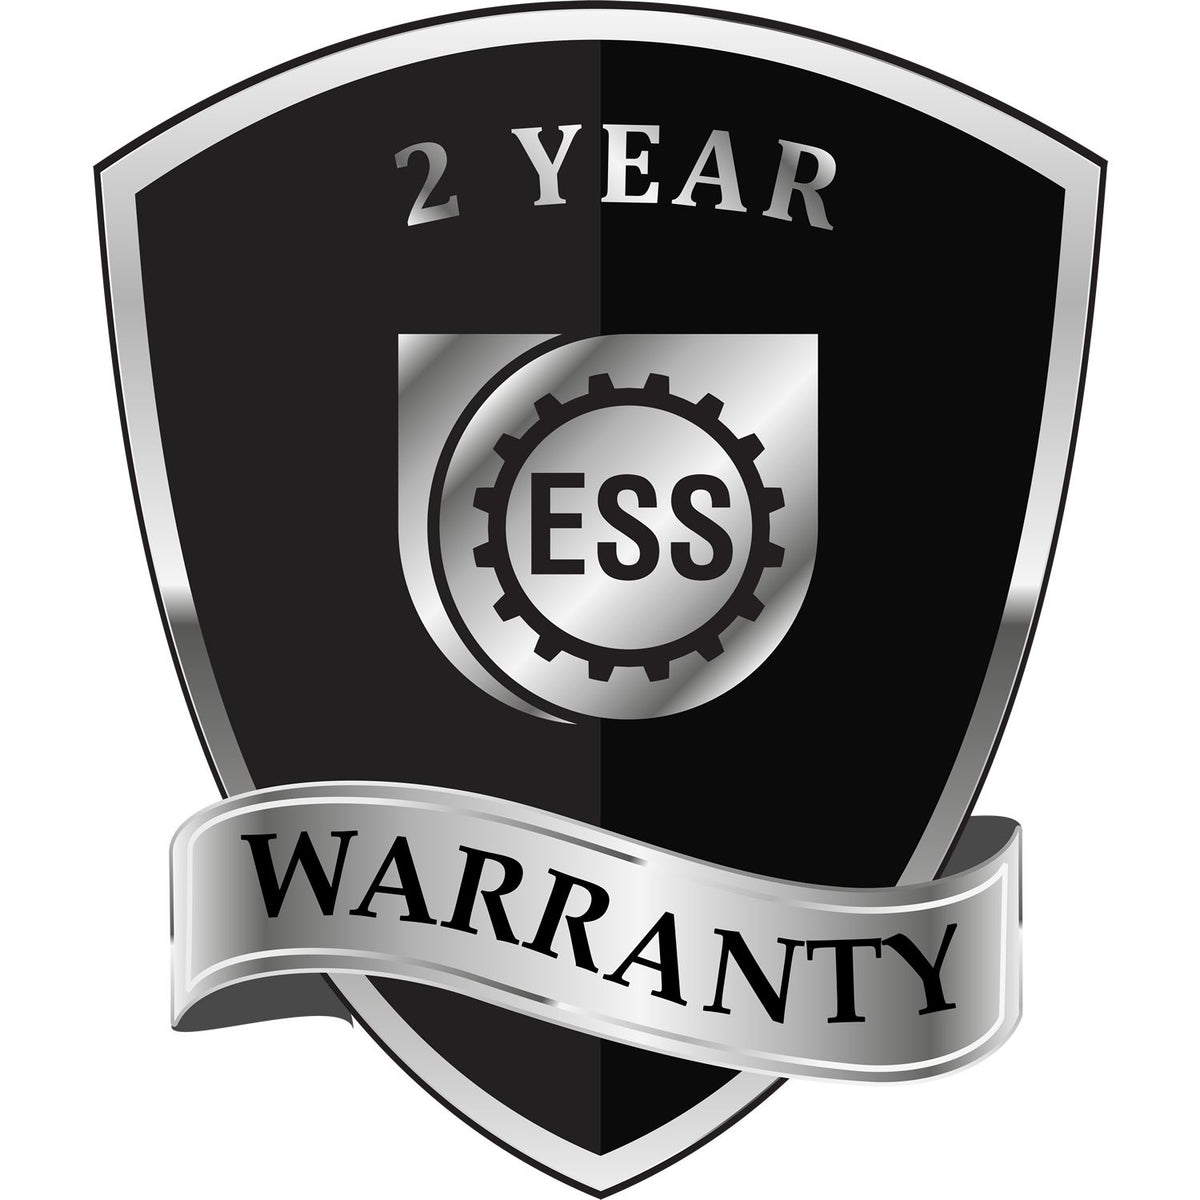 A badge or emblem showing a warranty icon for the Handheld Maryland Land Surveyor Seal